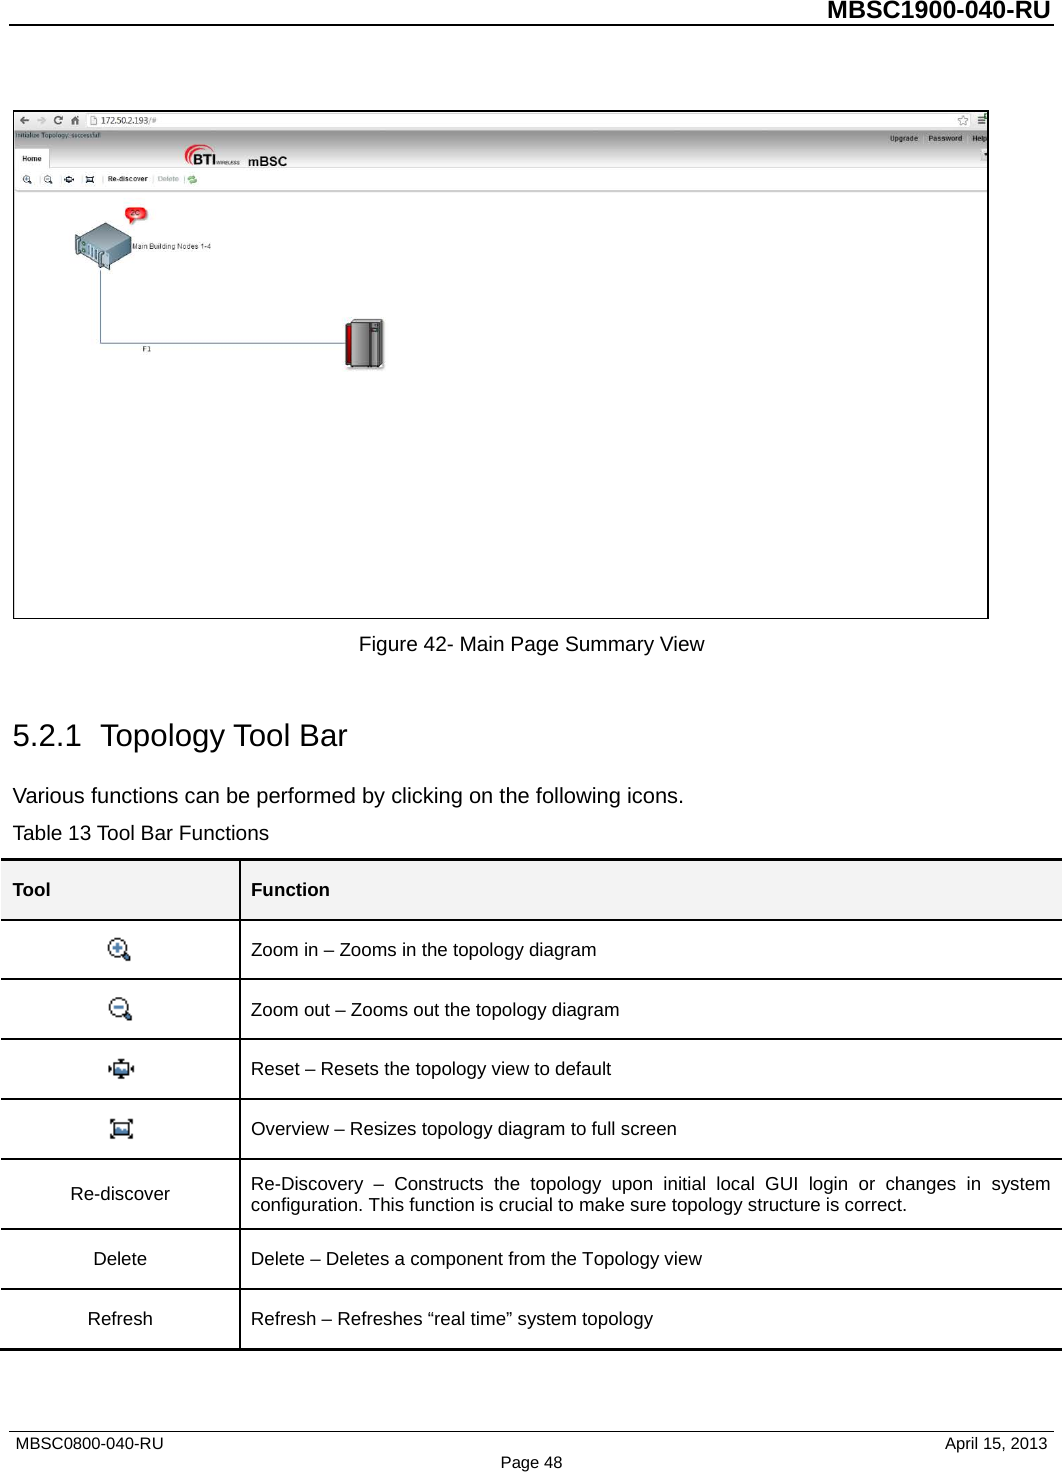          MBSC1900-040-RU    Figure 42- Main Page Summary View  5.2.1 Topology Tool Bar Various functions can be performed by clicking on the following icons. Table 13 Tool Bar Functions Tool Function  Zoom in – Zooms in the topology diagram  Zoom out – Zooms out the topology diagram  Reset – Resets the topology view to default  Overview – Resizes topology diagram to full screen   Re-discover Re-Discovery  –  Constructs the topology upon initial local GUI login or changes in system configuration. This function is crucial to make sure topology structure is correct. Delete Delete – Deletes a component from the Topology view Refresh Refresh – Refreshes “real time” system topology  MBSC0800-040-RU                                      April 15, 2013 Page 48 